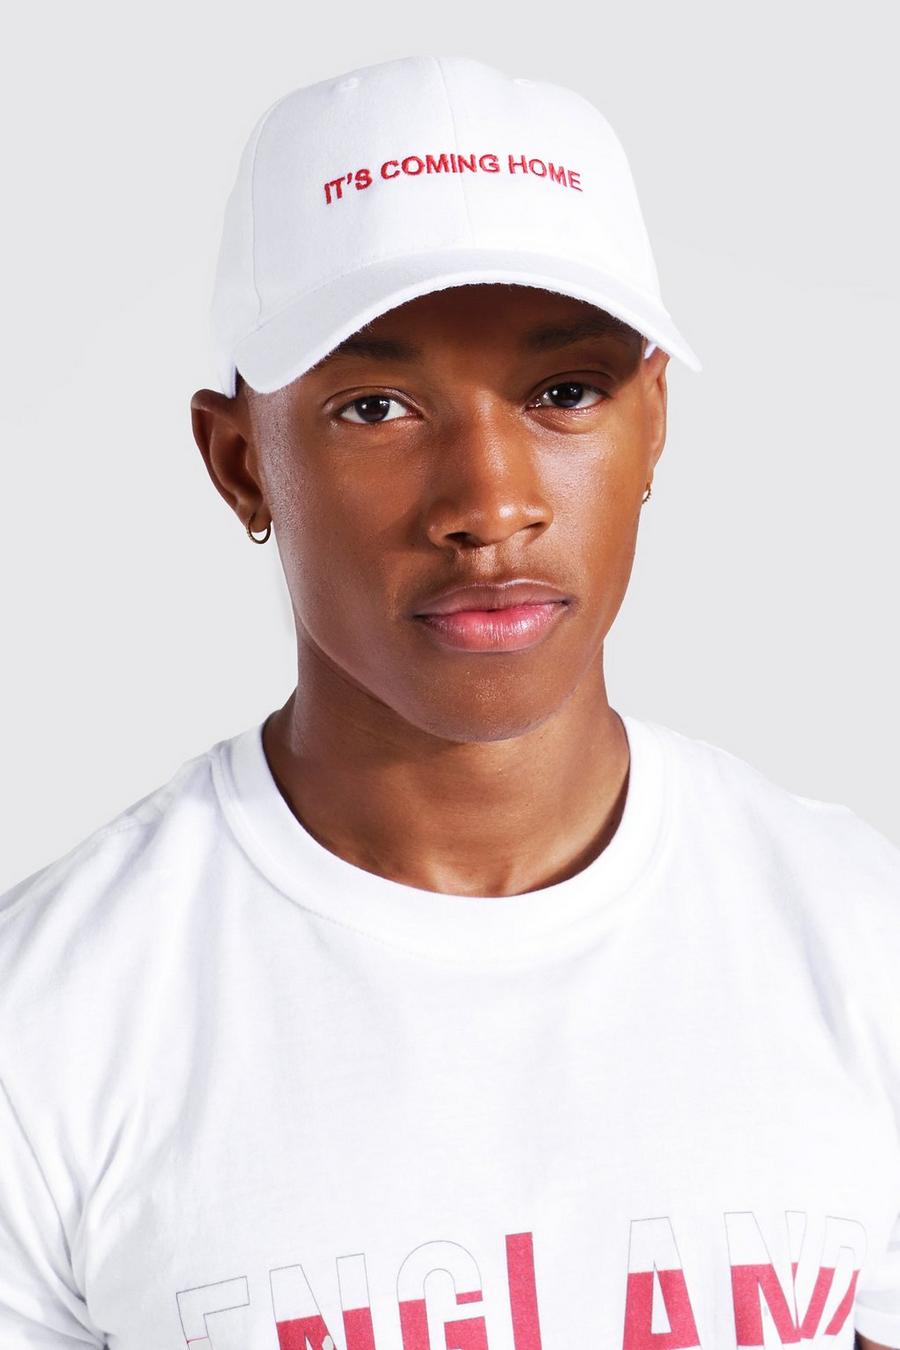 Casquette "It's coming home", White blanc image number 1